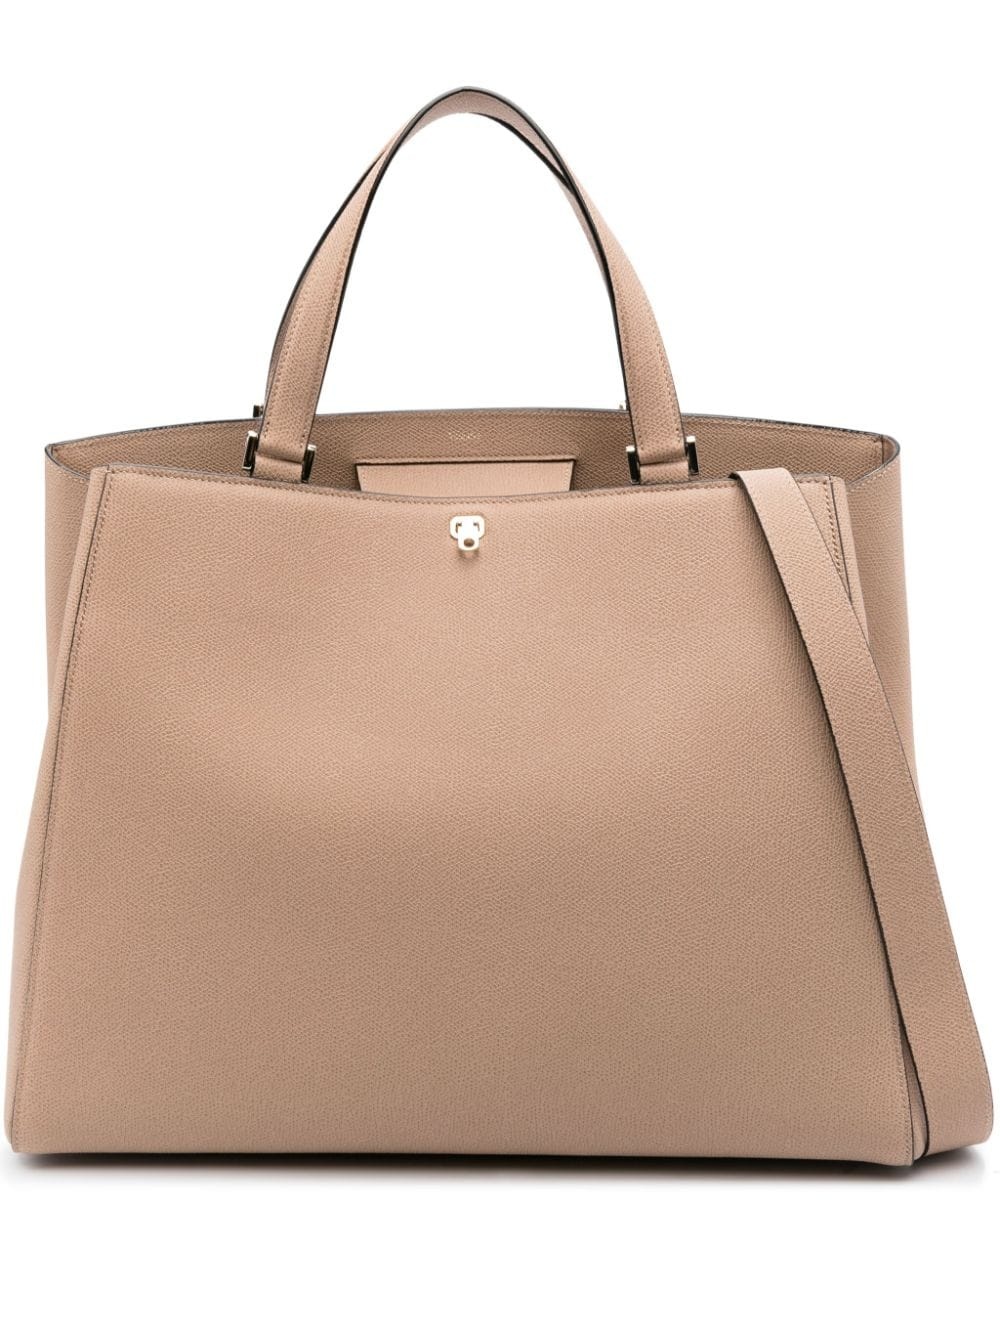 Valextra large Brera leather tote bag